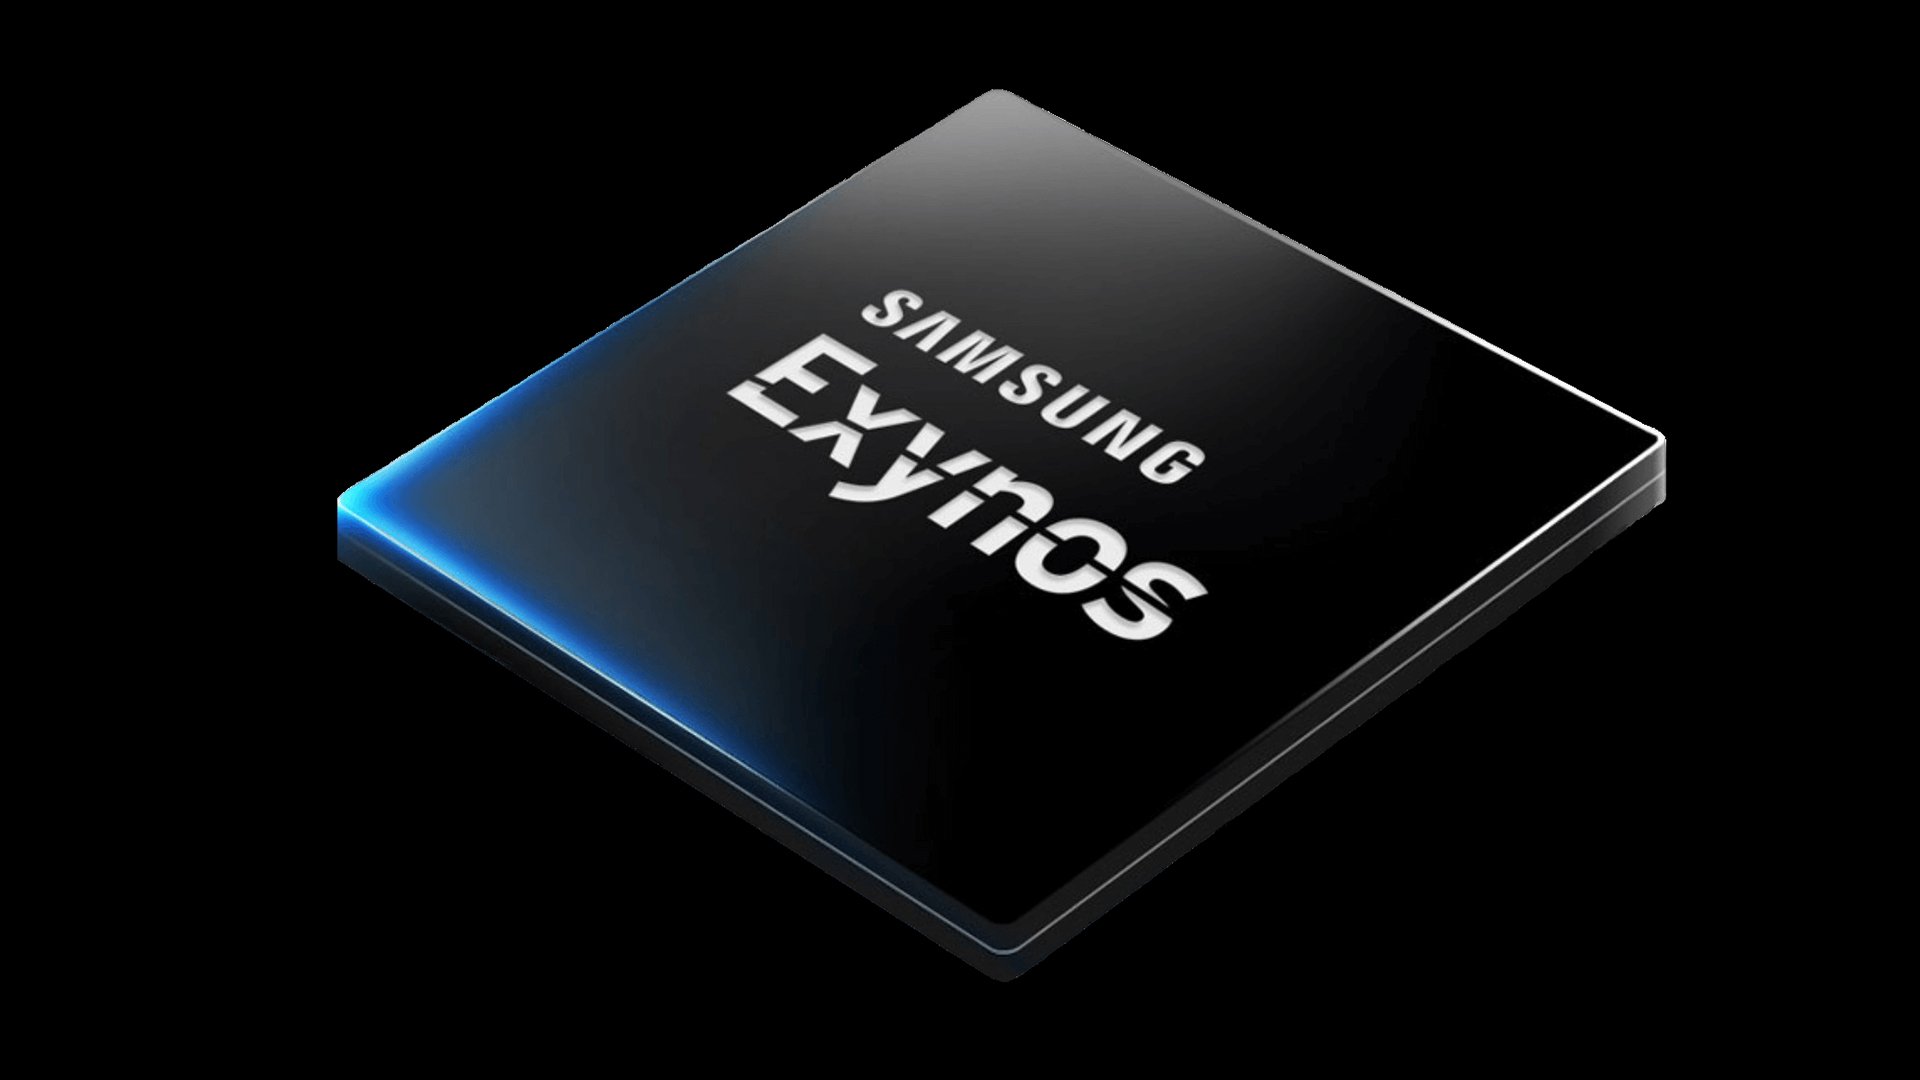 Samsung is preparing the Exynos 5G chip for its next affordable smartphones